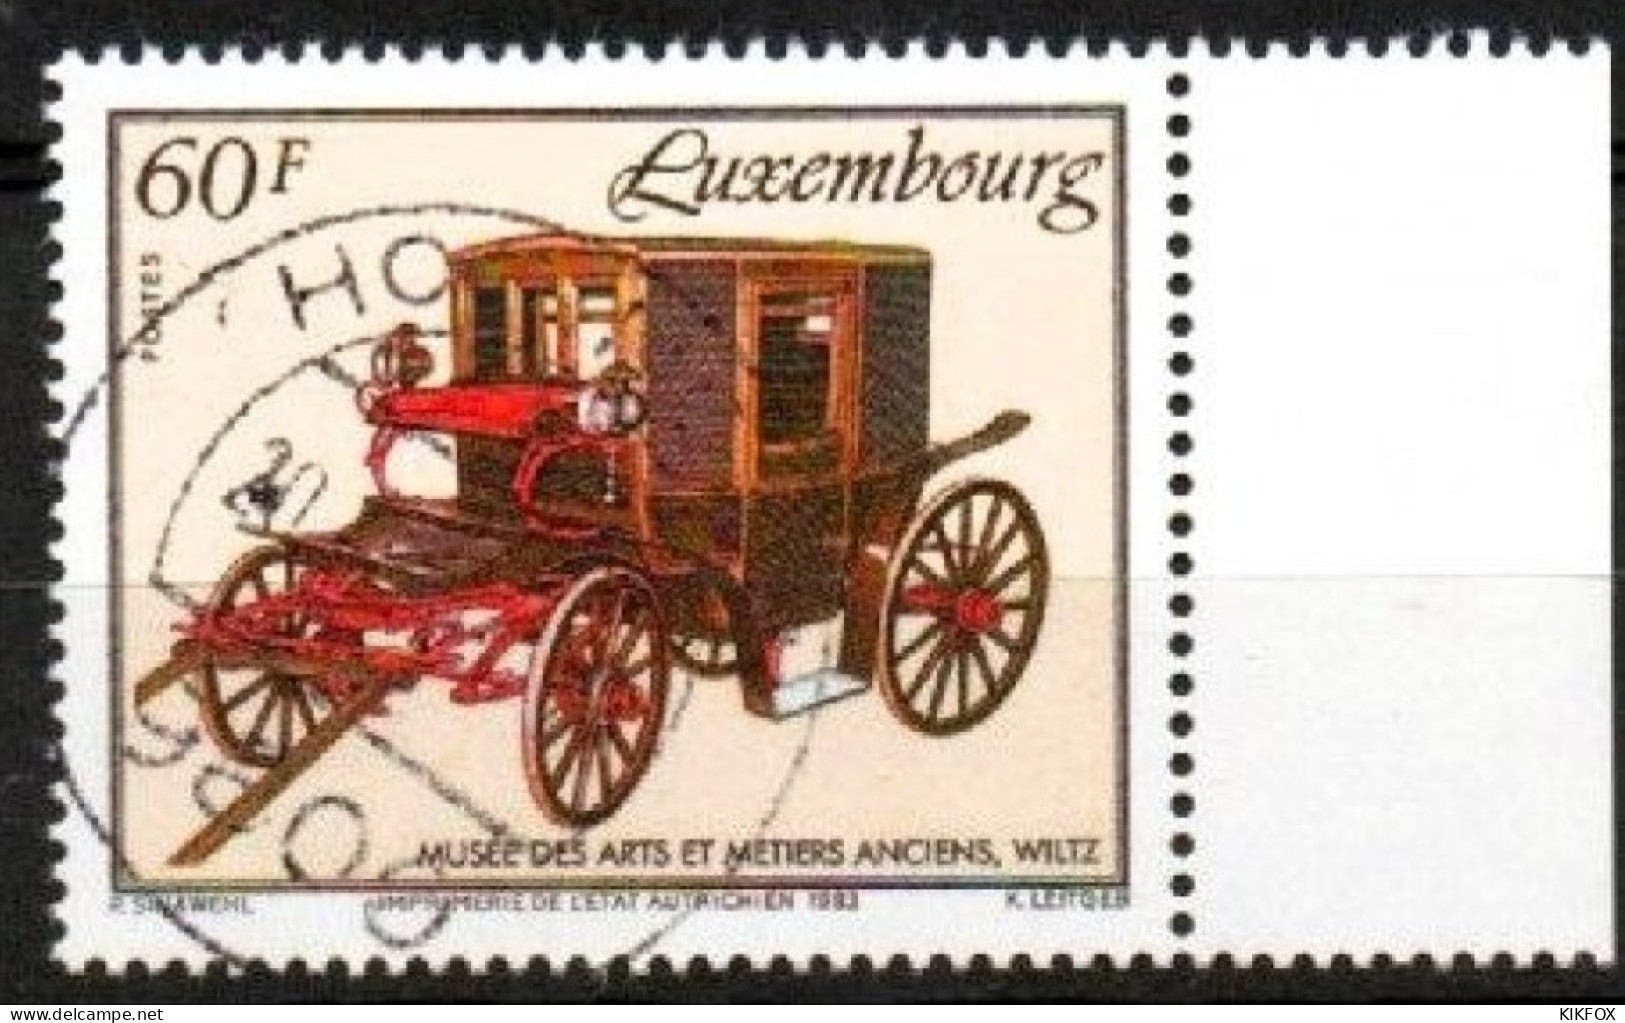 Luxembourg, Luxemburg, 1993,  Y&T 1276, MI 1326, MUSEEN, MUSSEES,  GESTEMPELT, OBLITERE - Used Stamps